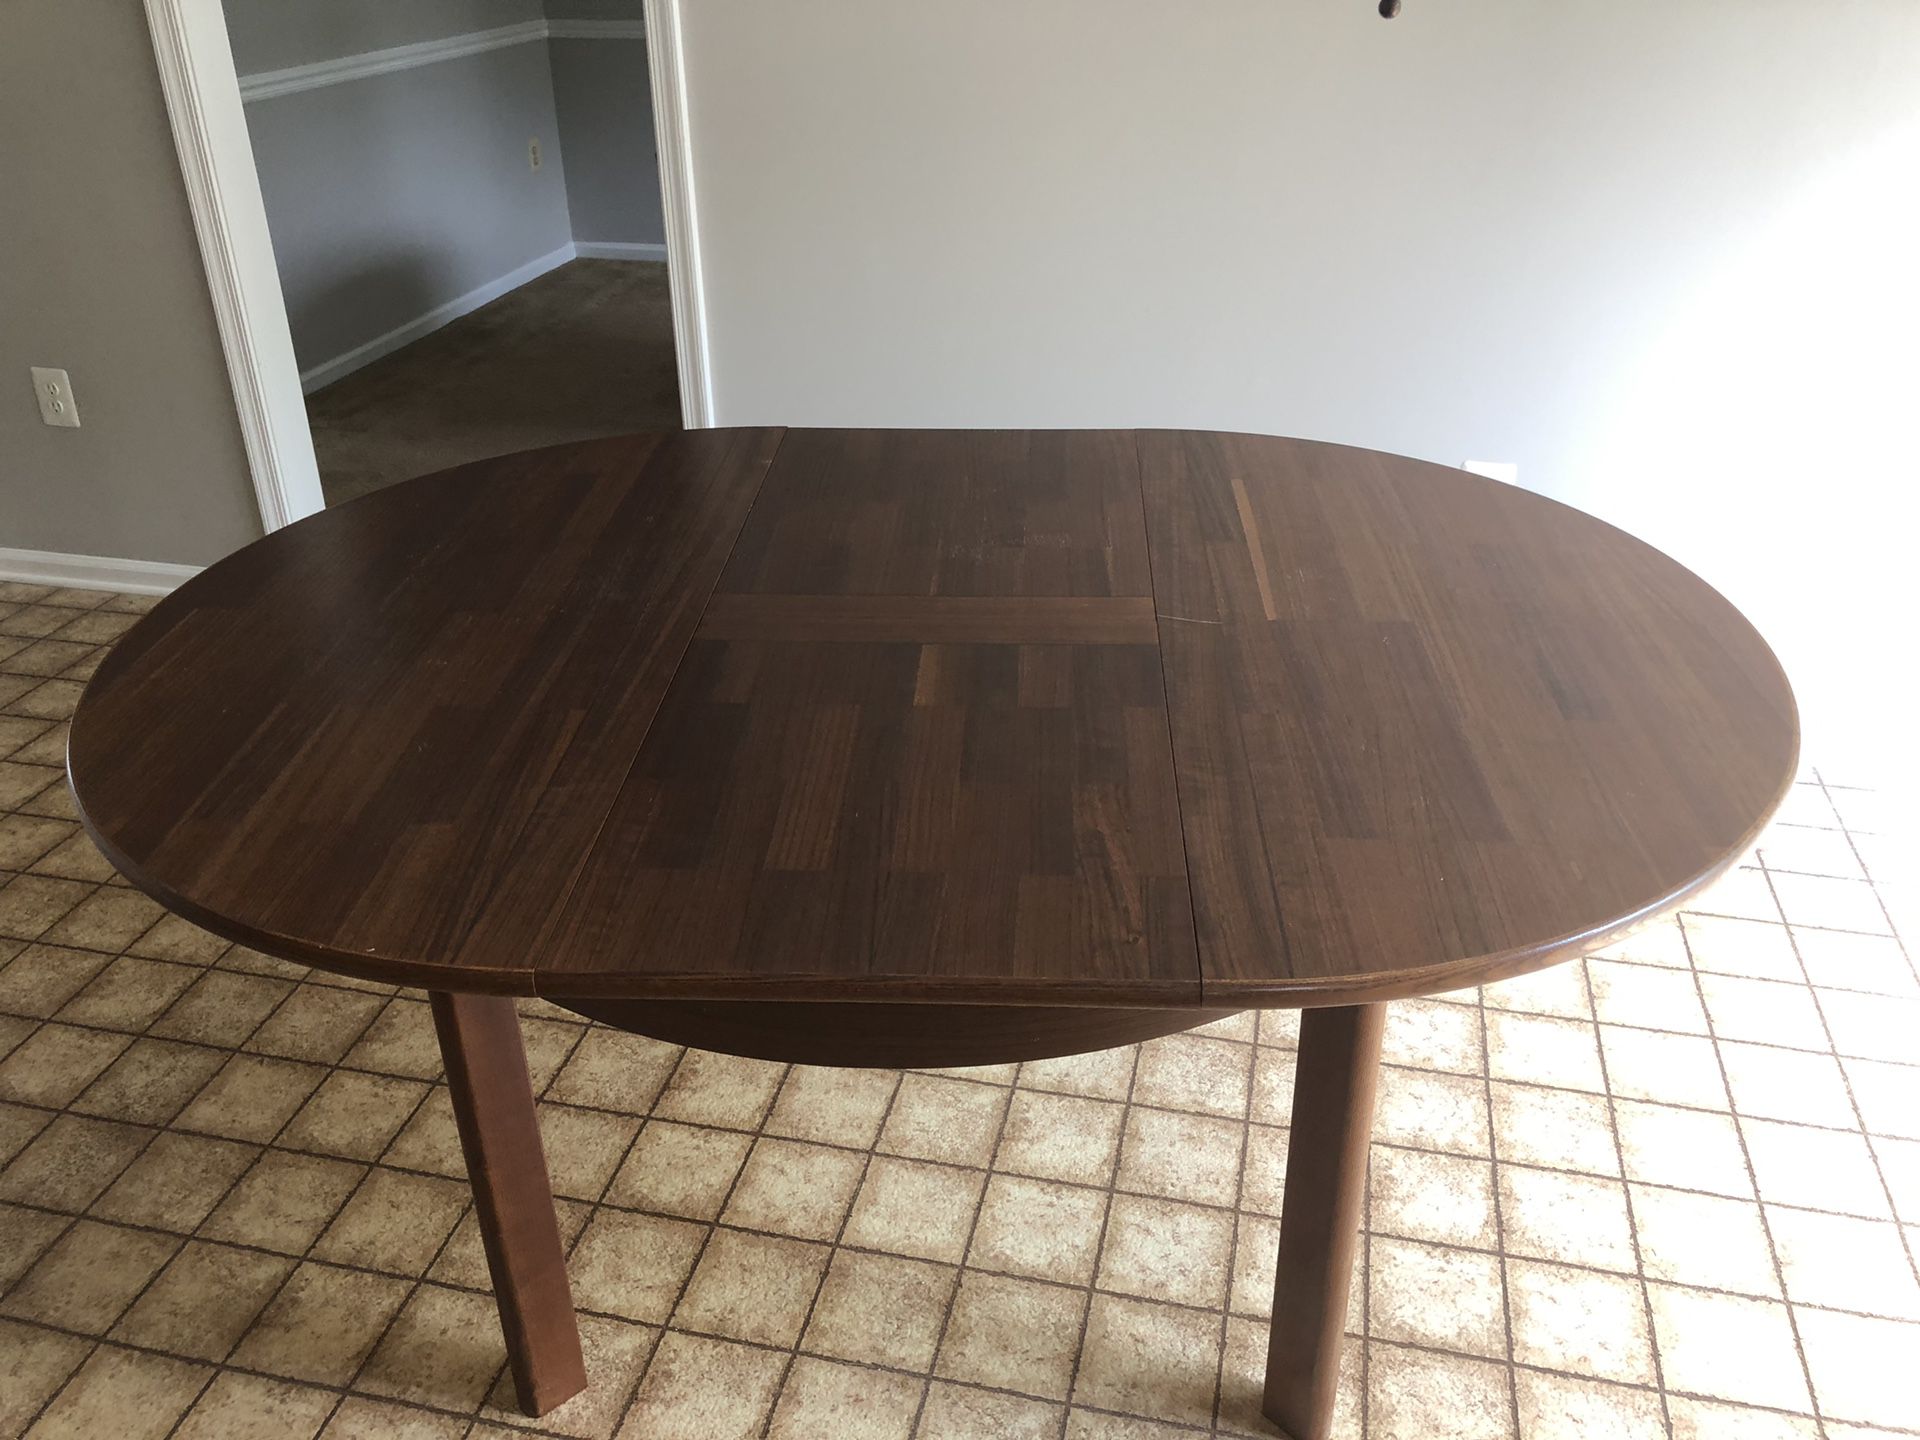 Kitchen Table with extension leaf